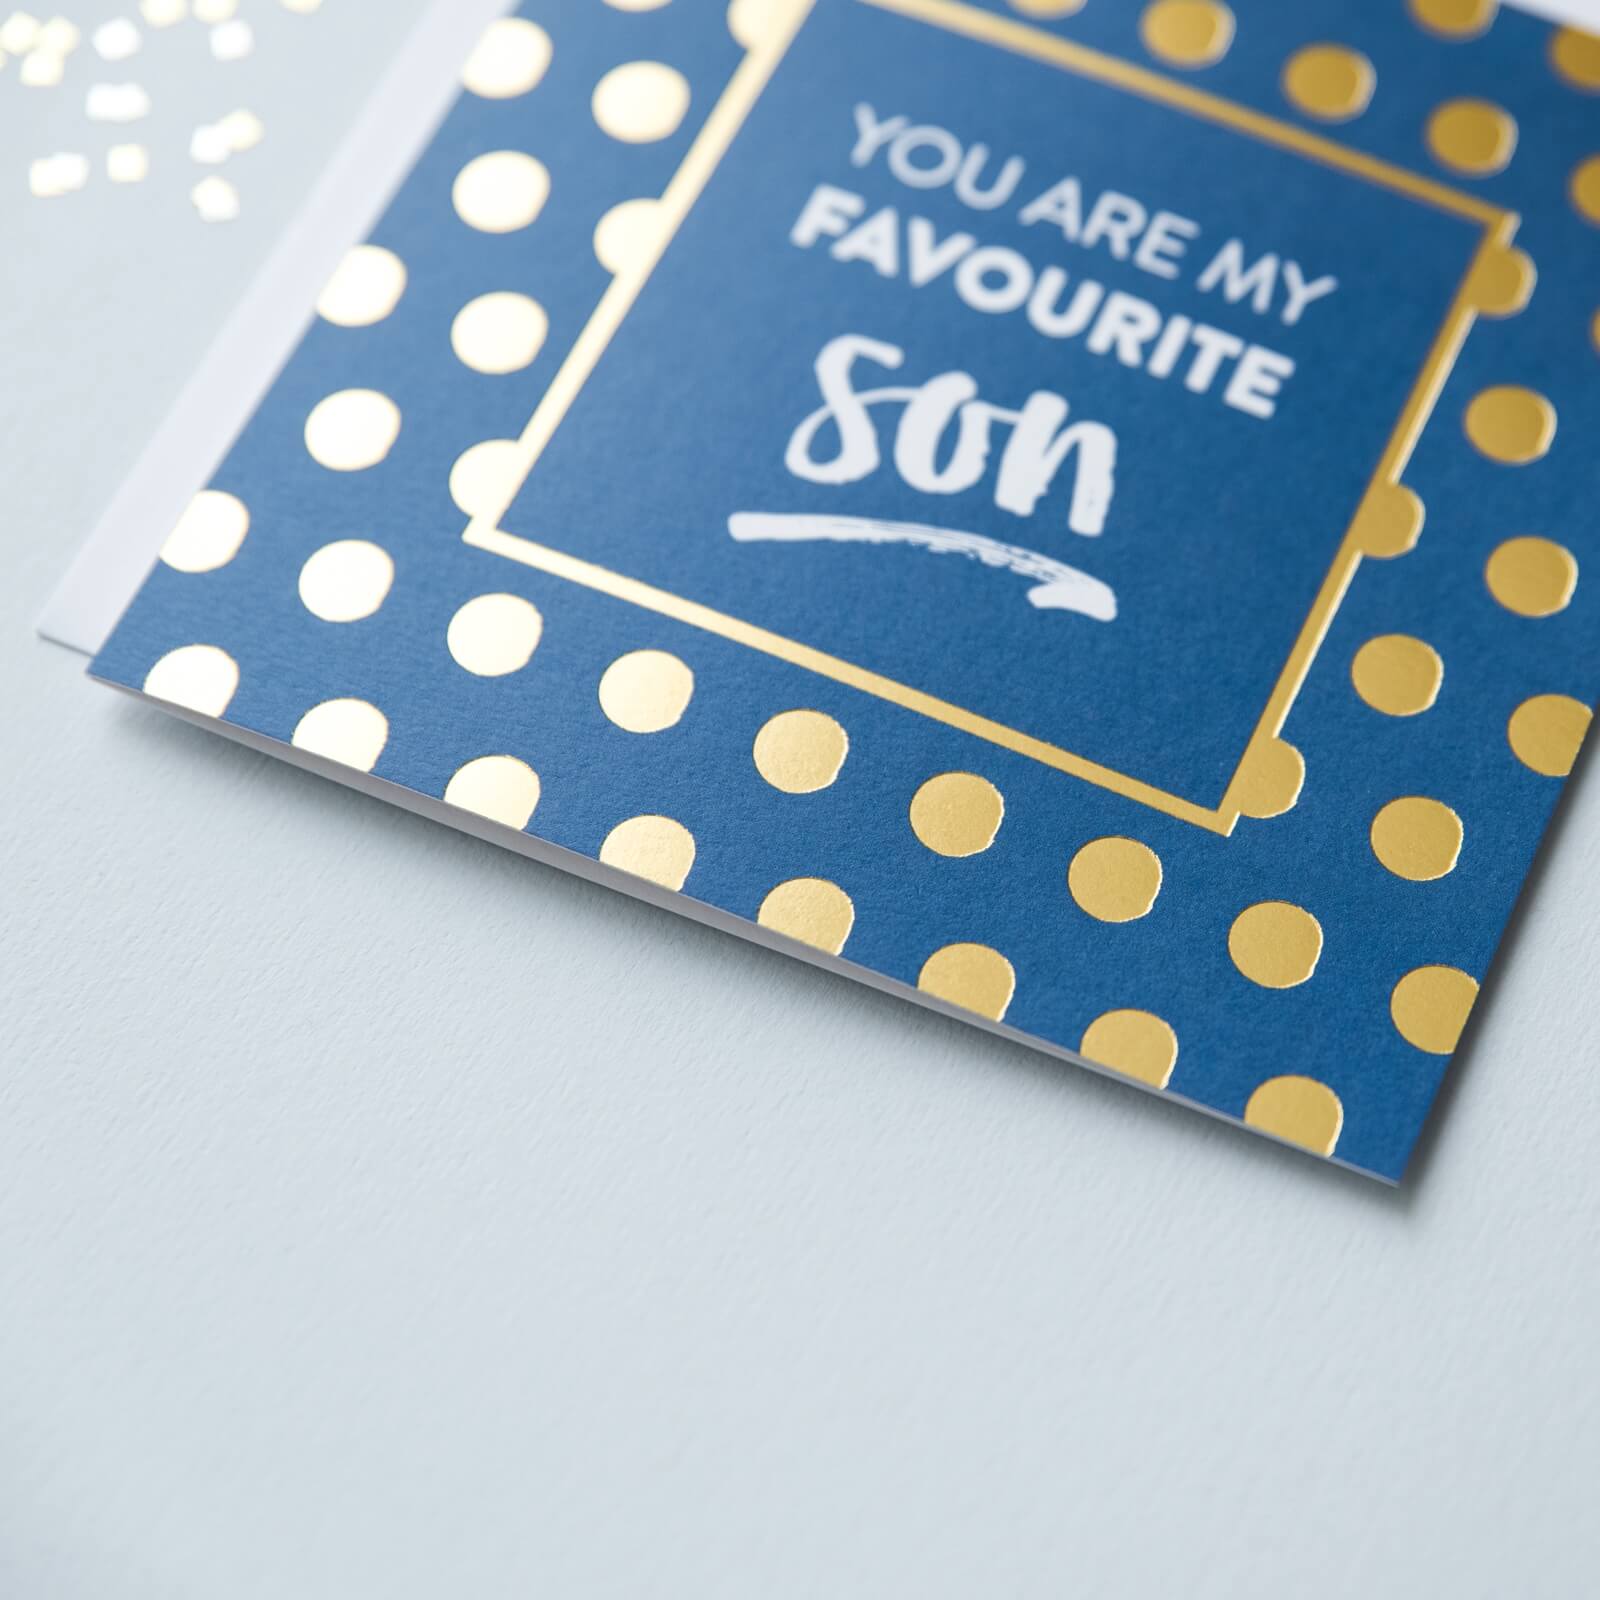 'You Are My Favourite Son' Gold Foil Card - I am Nat Ltd - Greeting Card